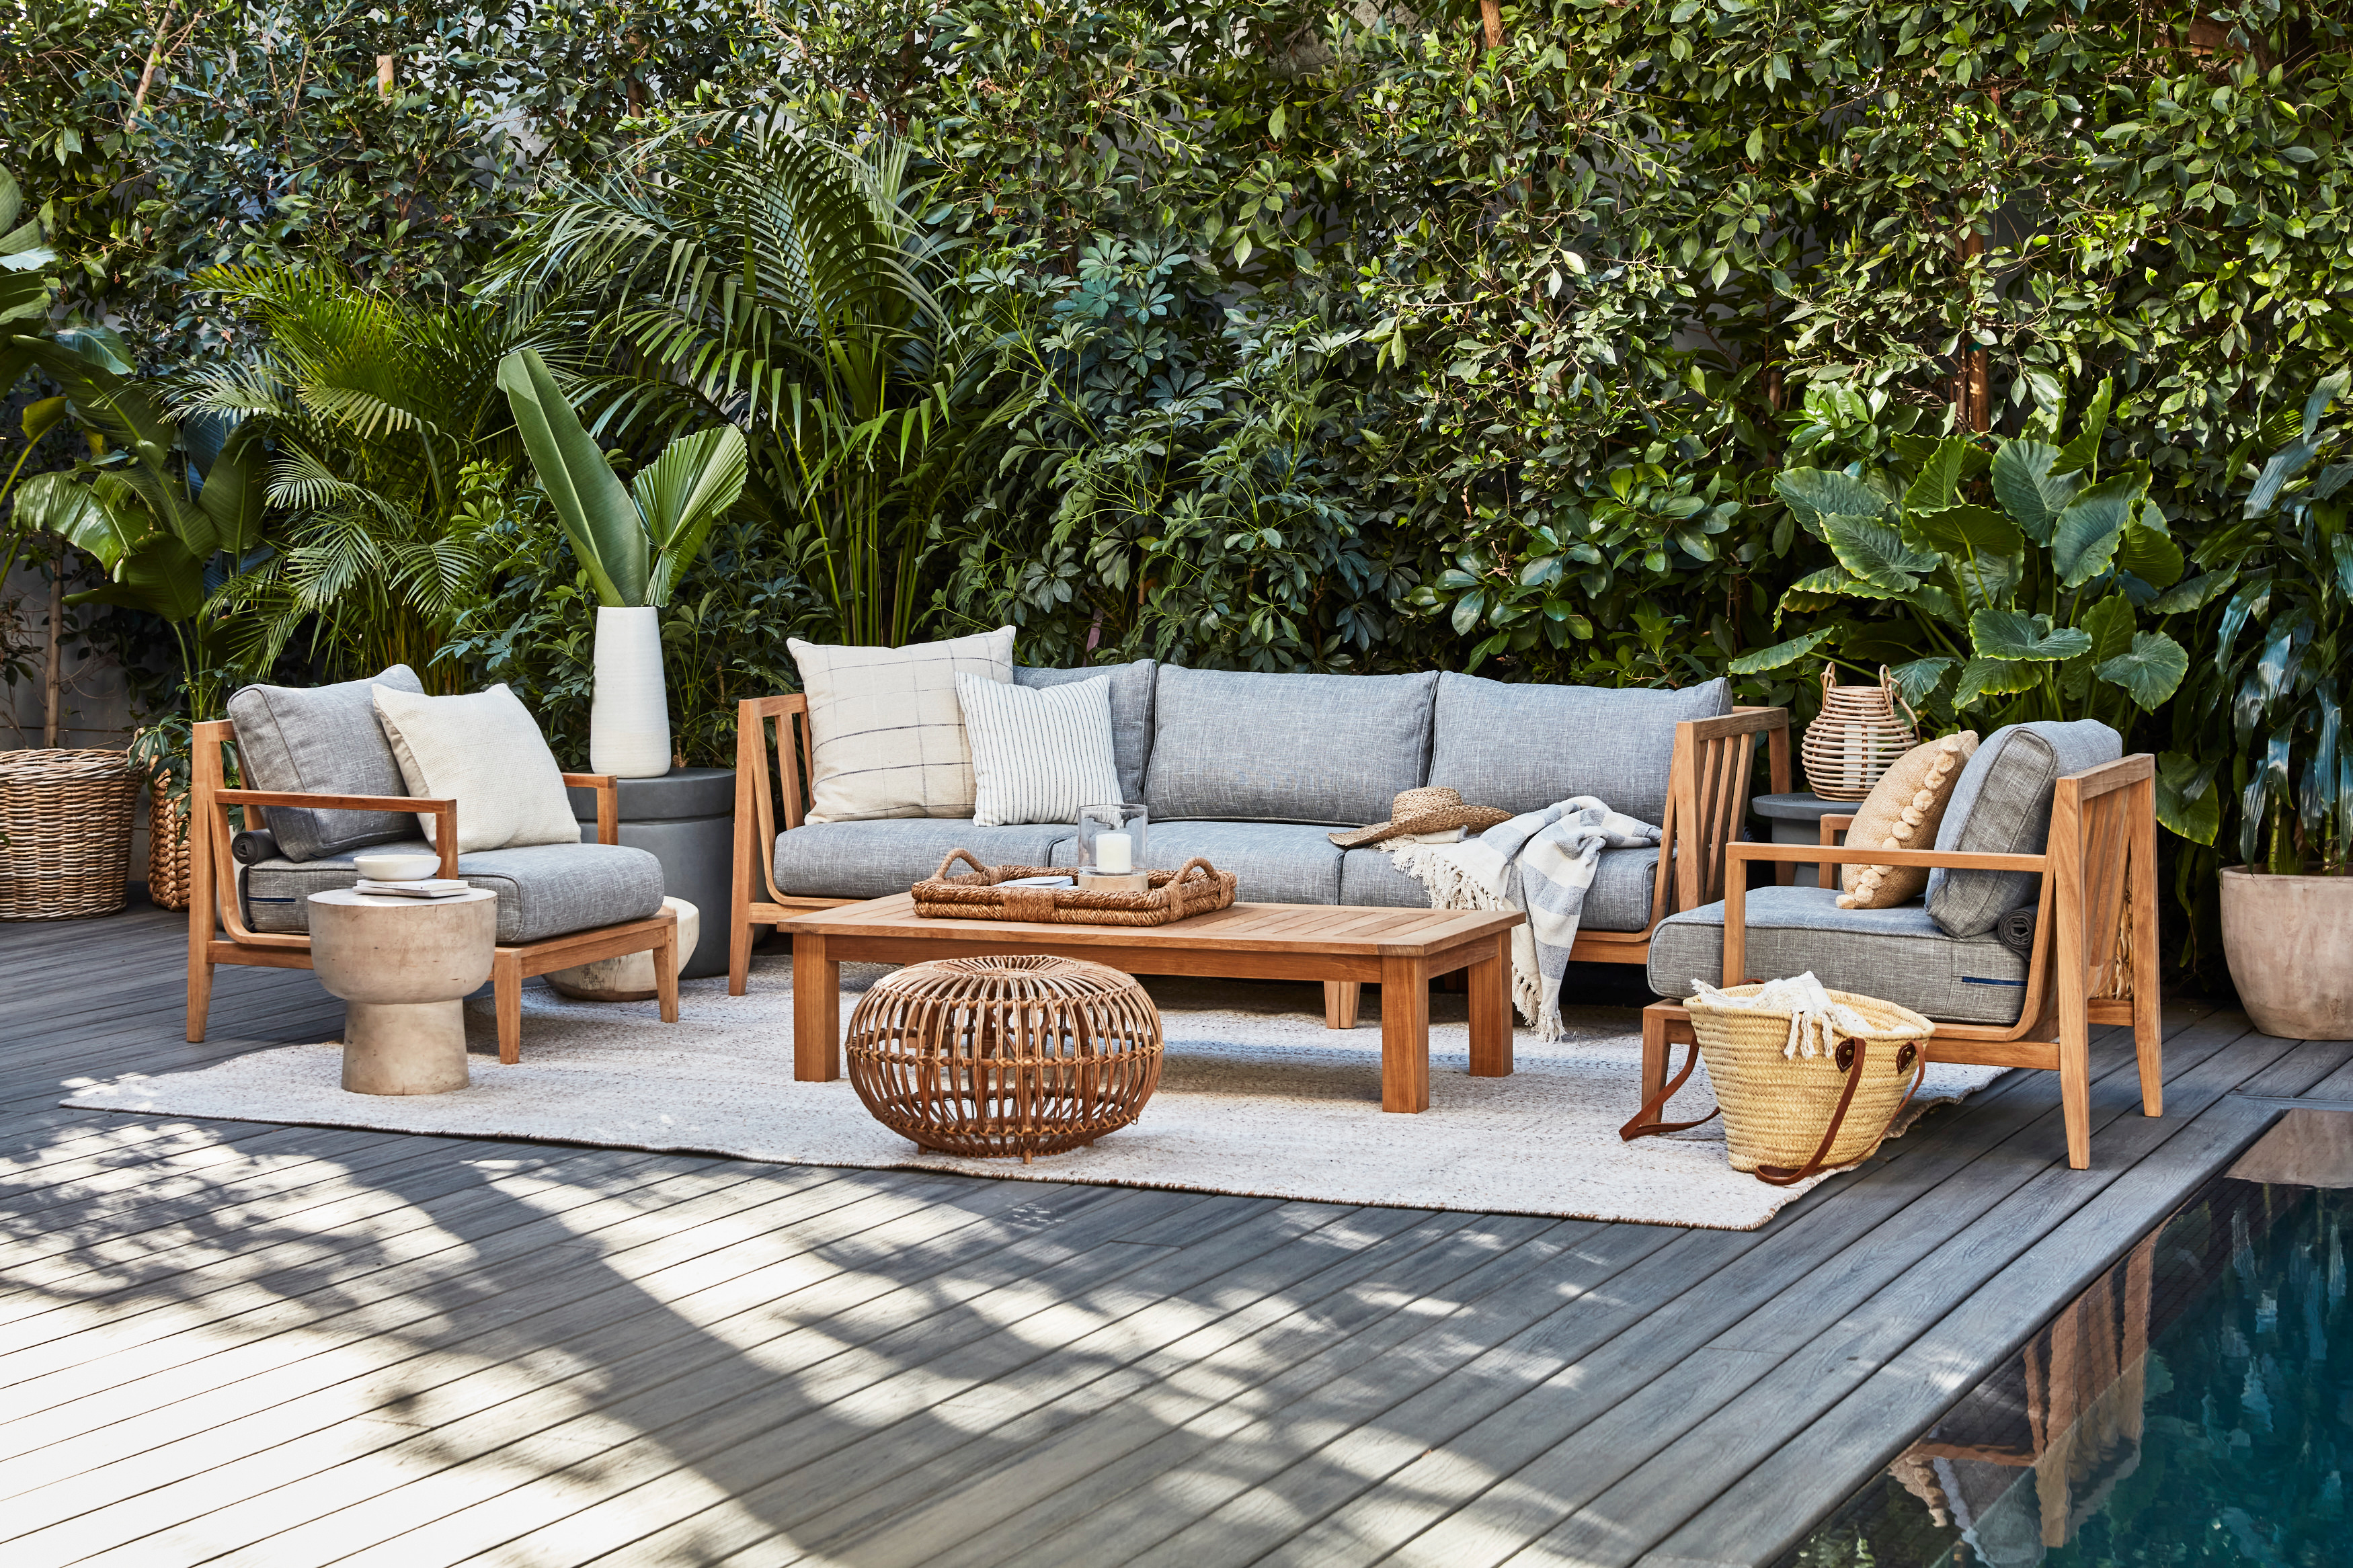 Outer Sustainable Outdoor Living Brand Announces Second Ever Furniture Collection Teak